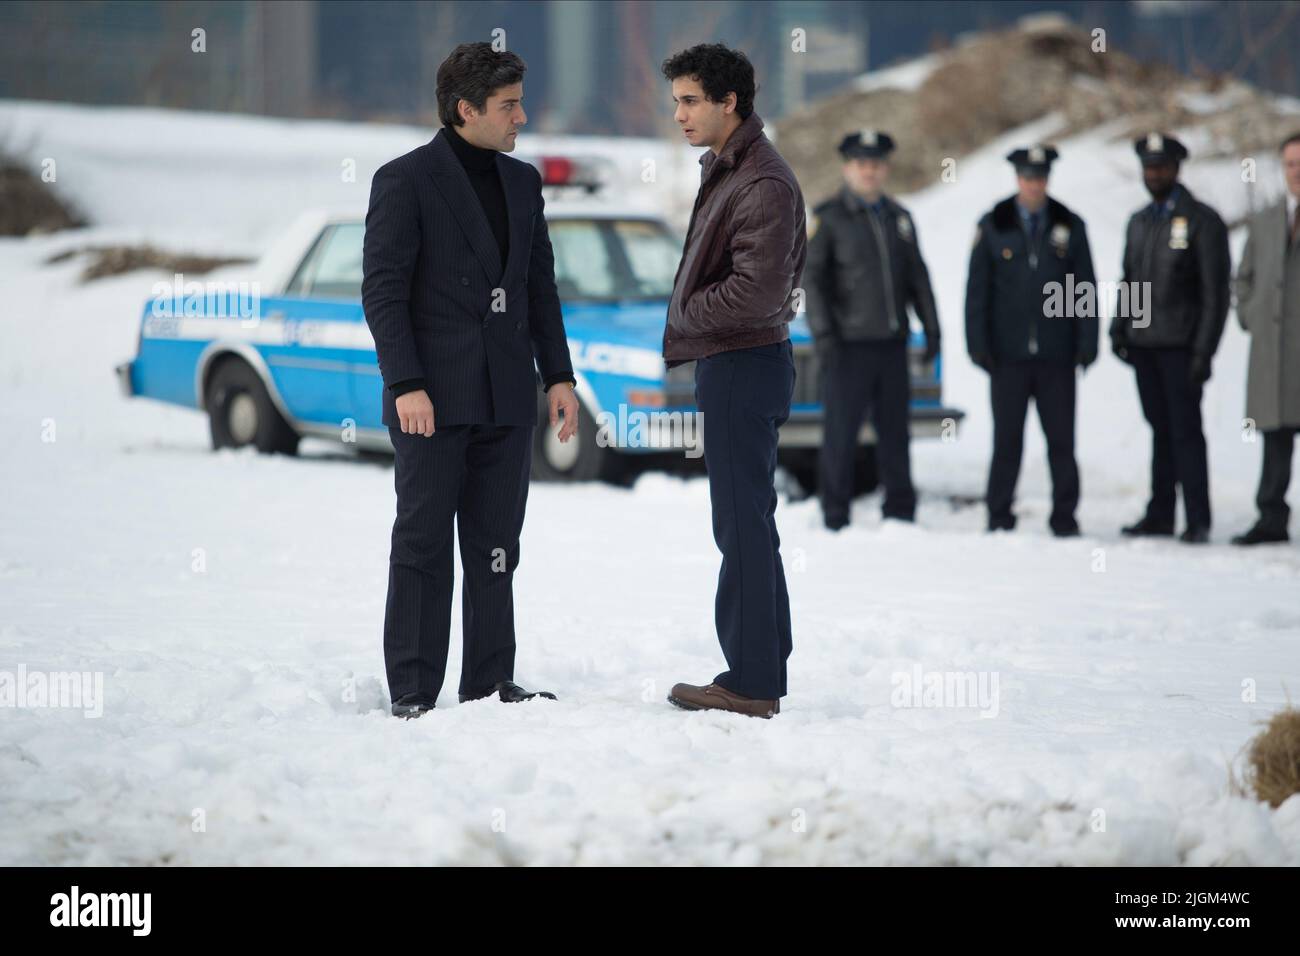 ISAAC,GABEL, A MOST VIOLENT YEAR, 2014 Stock Photo